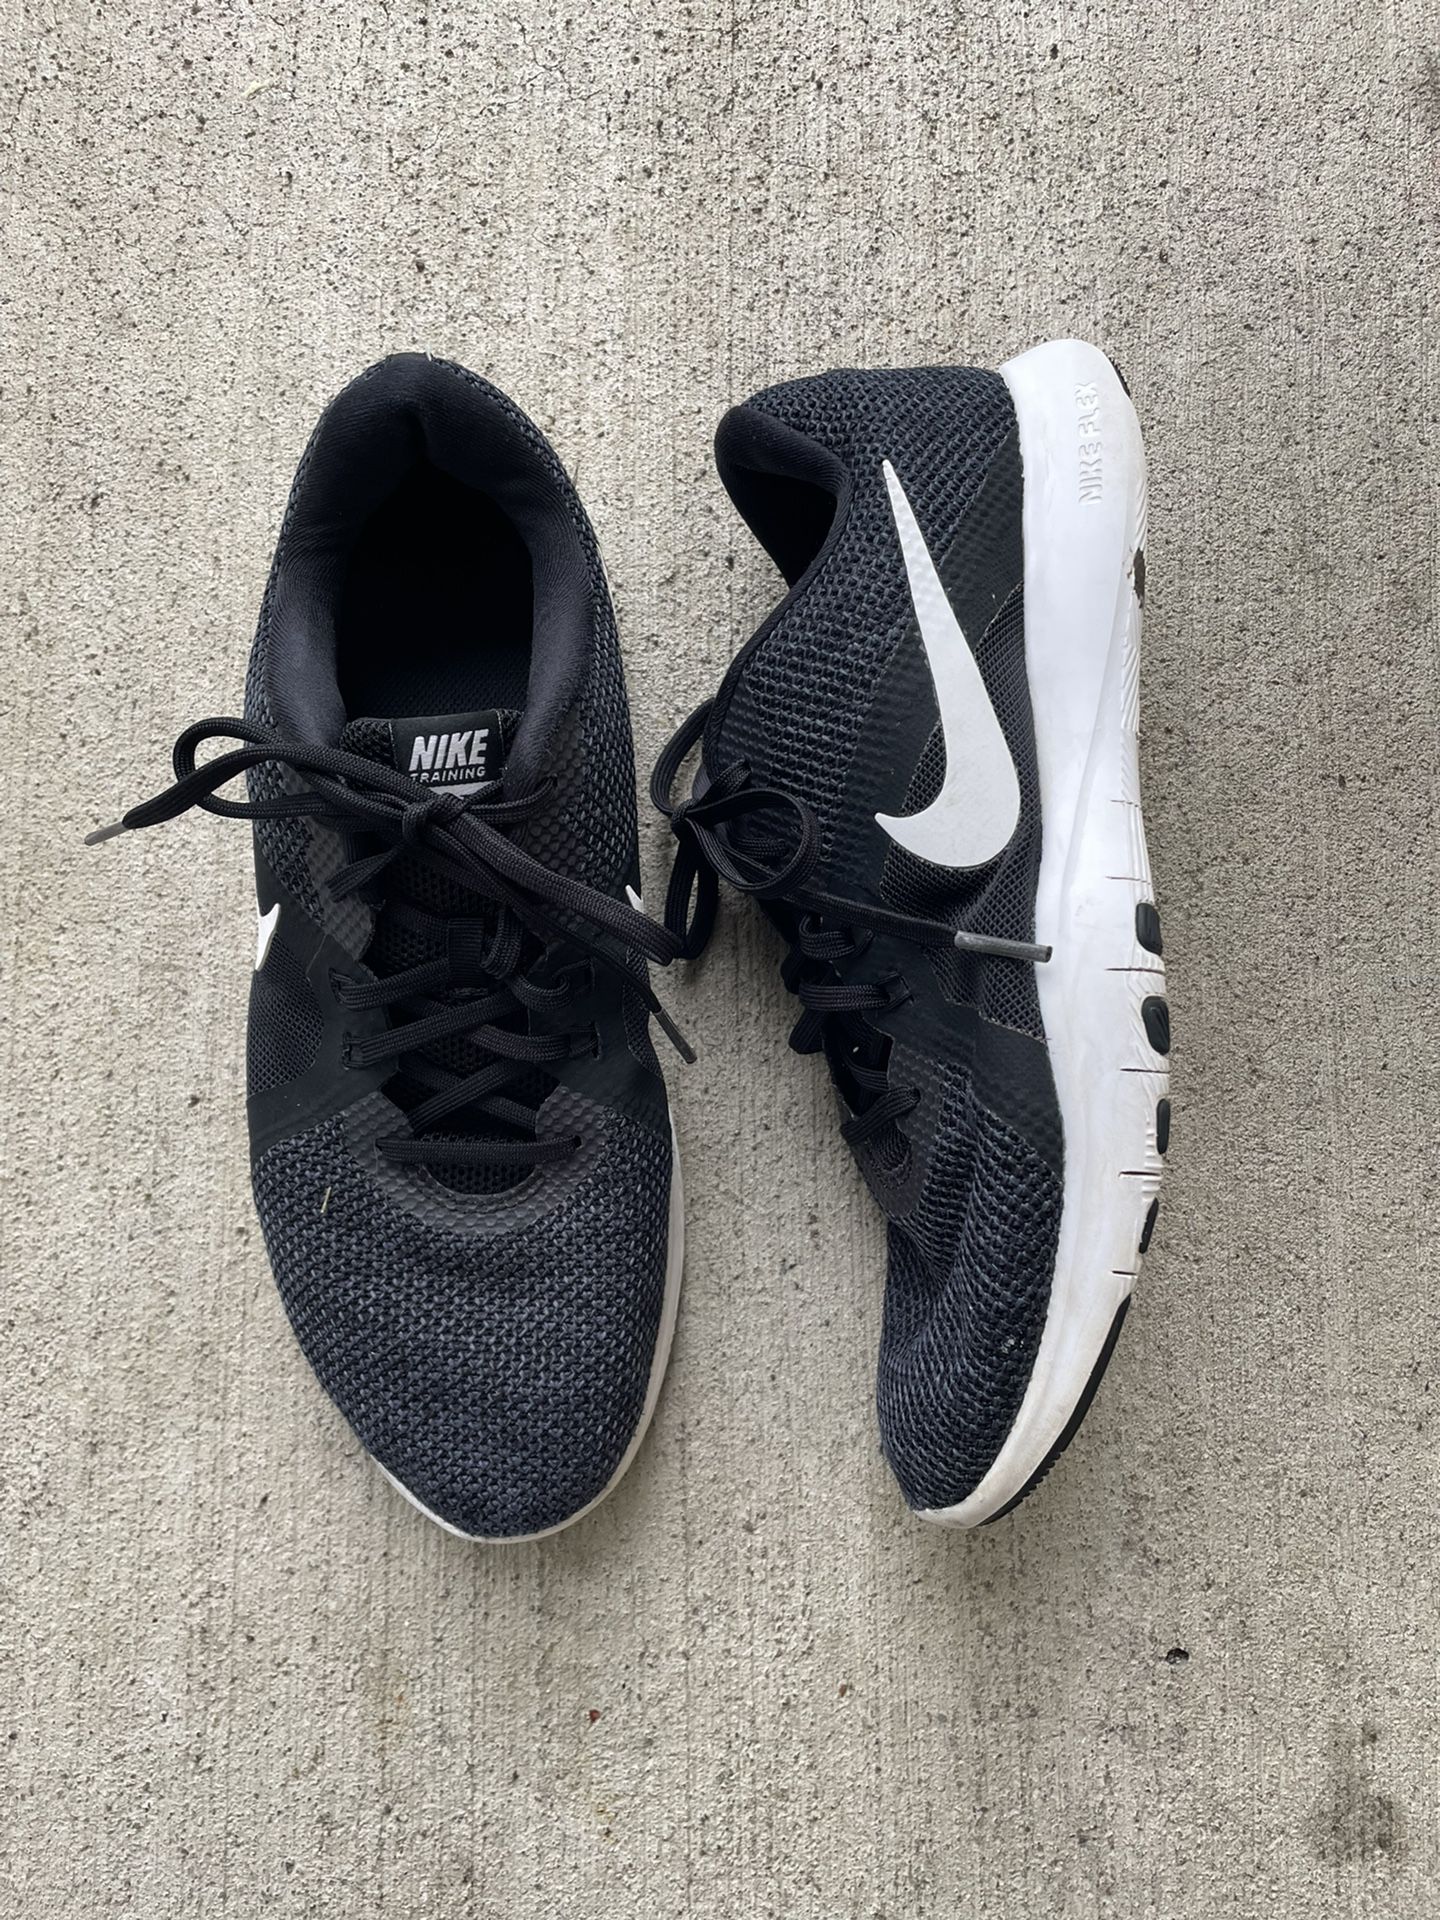 Adoración carbohidrato entidad Nike Womens Flex Trainer 8 924339-001 Black Running size 11W for Sale in  Vancouver, WA - OfferUp